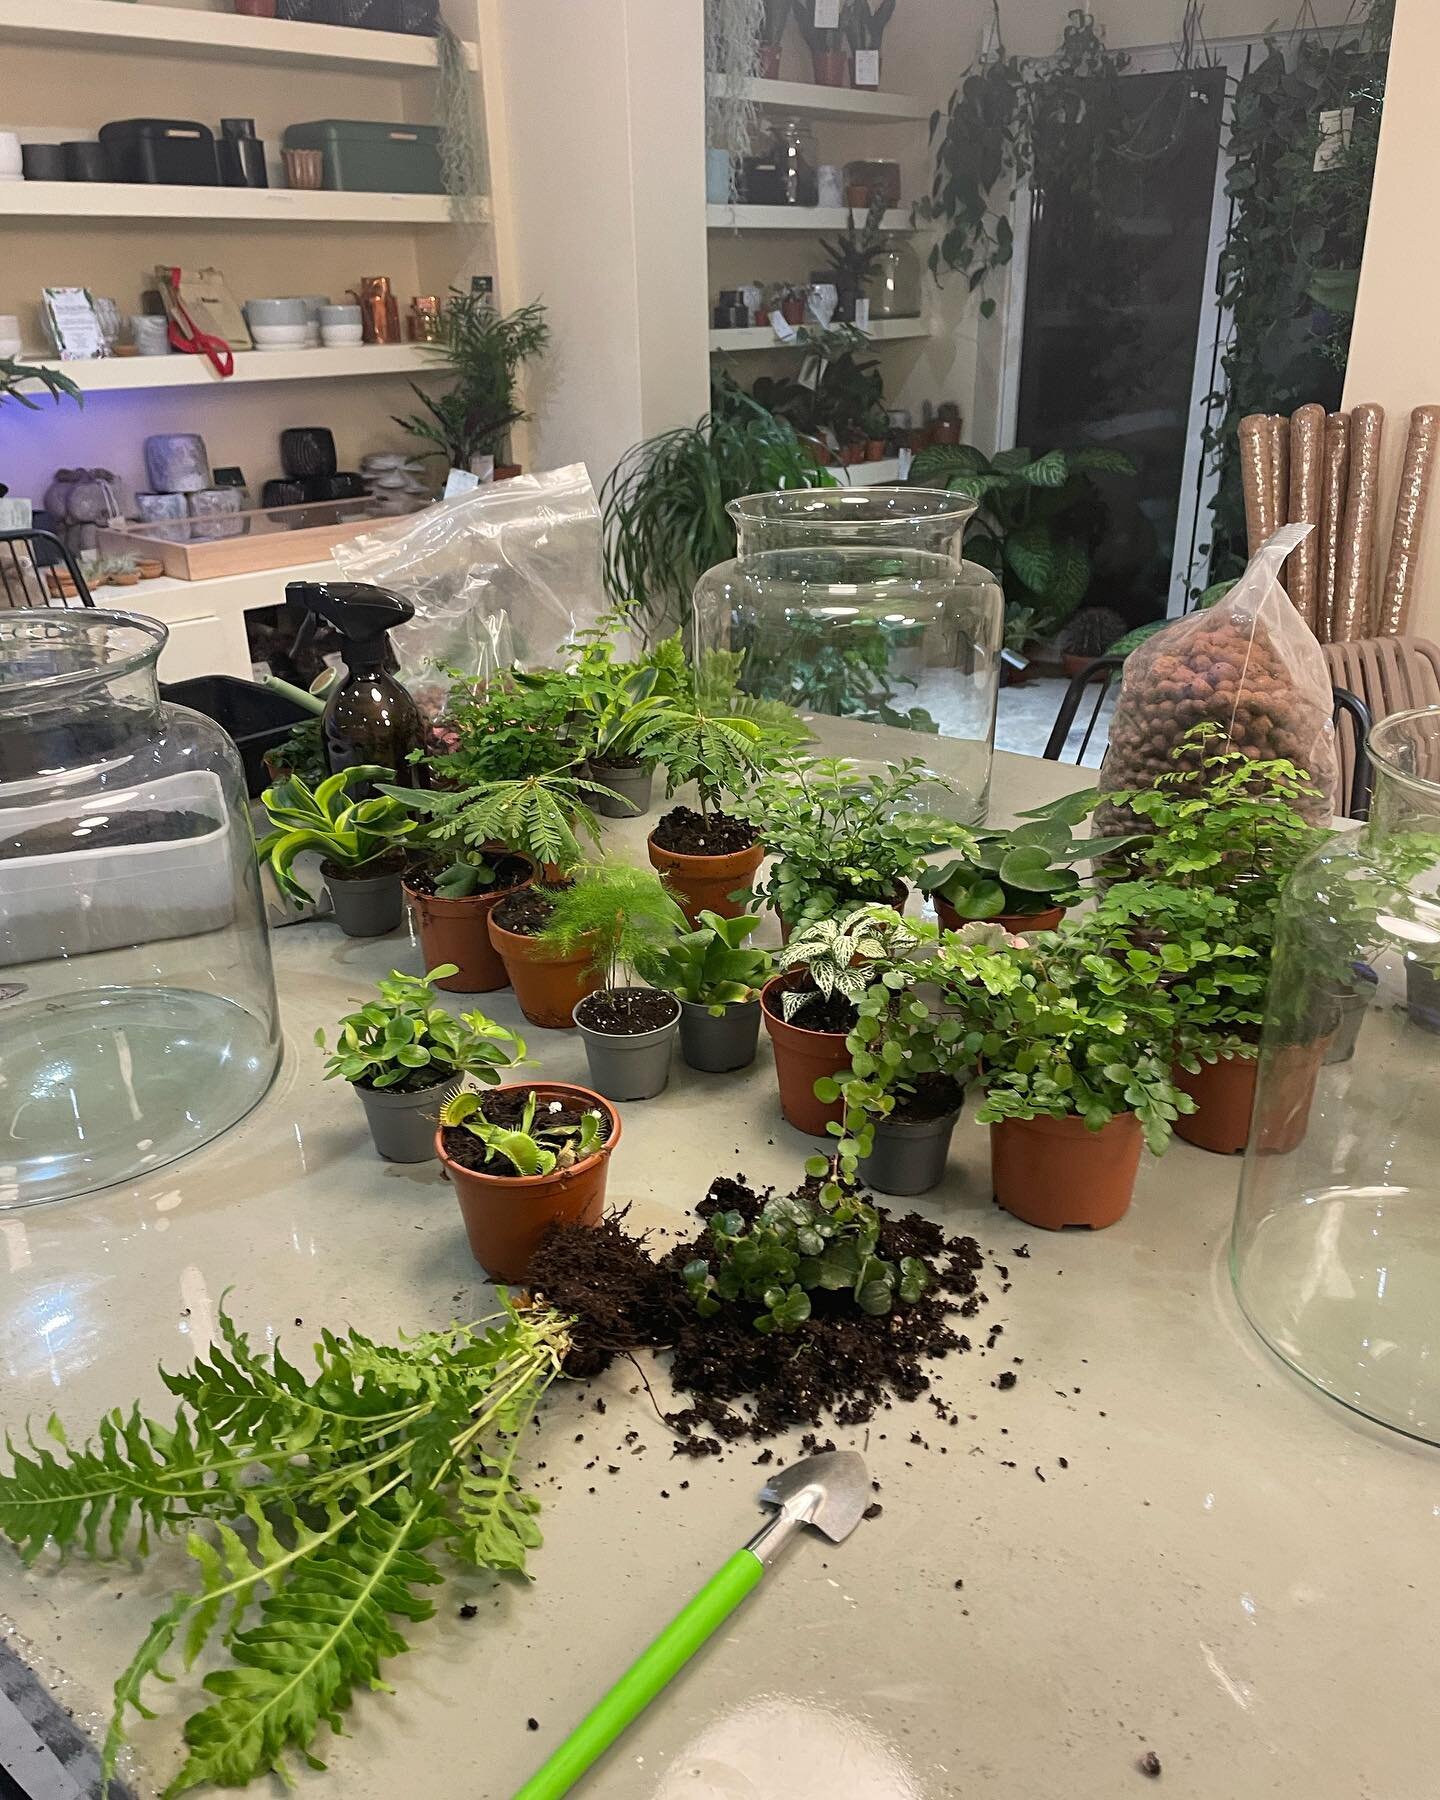 Terrarium Workshop - New Date 🪴☀️

25th April 18:00-19:30
📍 @sorrel.stores 

See link in bio for all details and to book your place! Limited spaces available 🌿